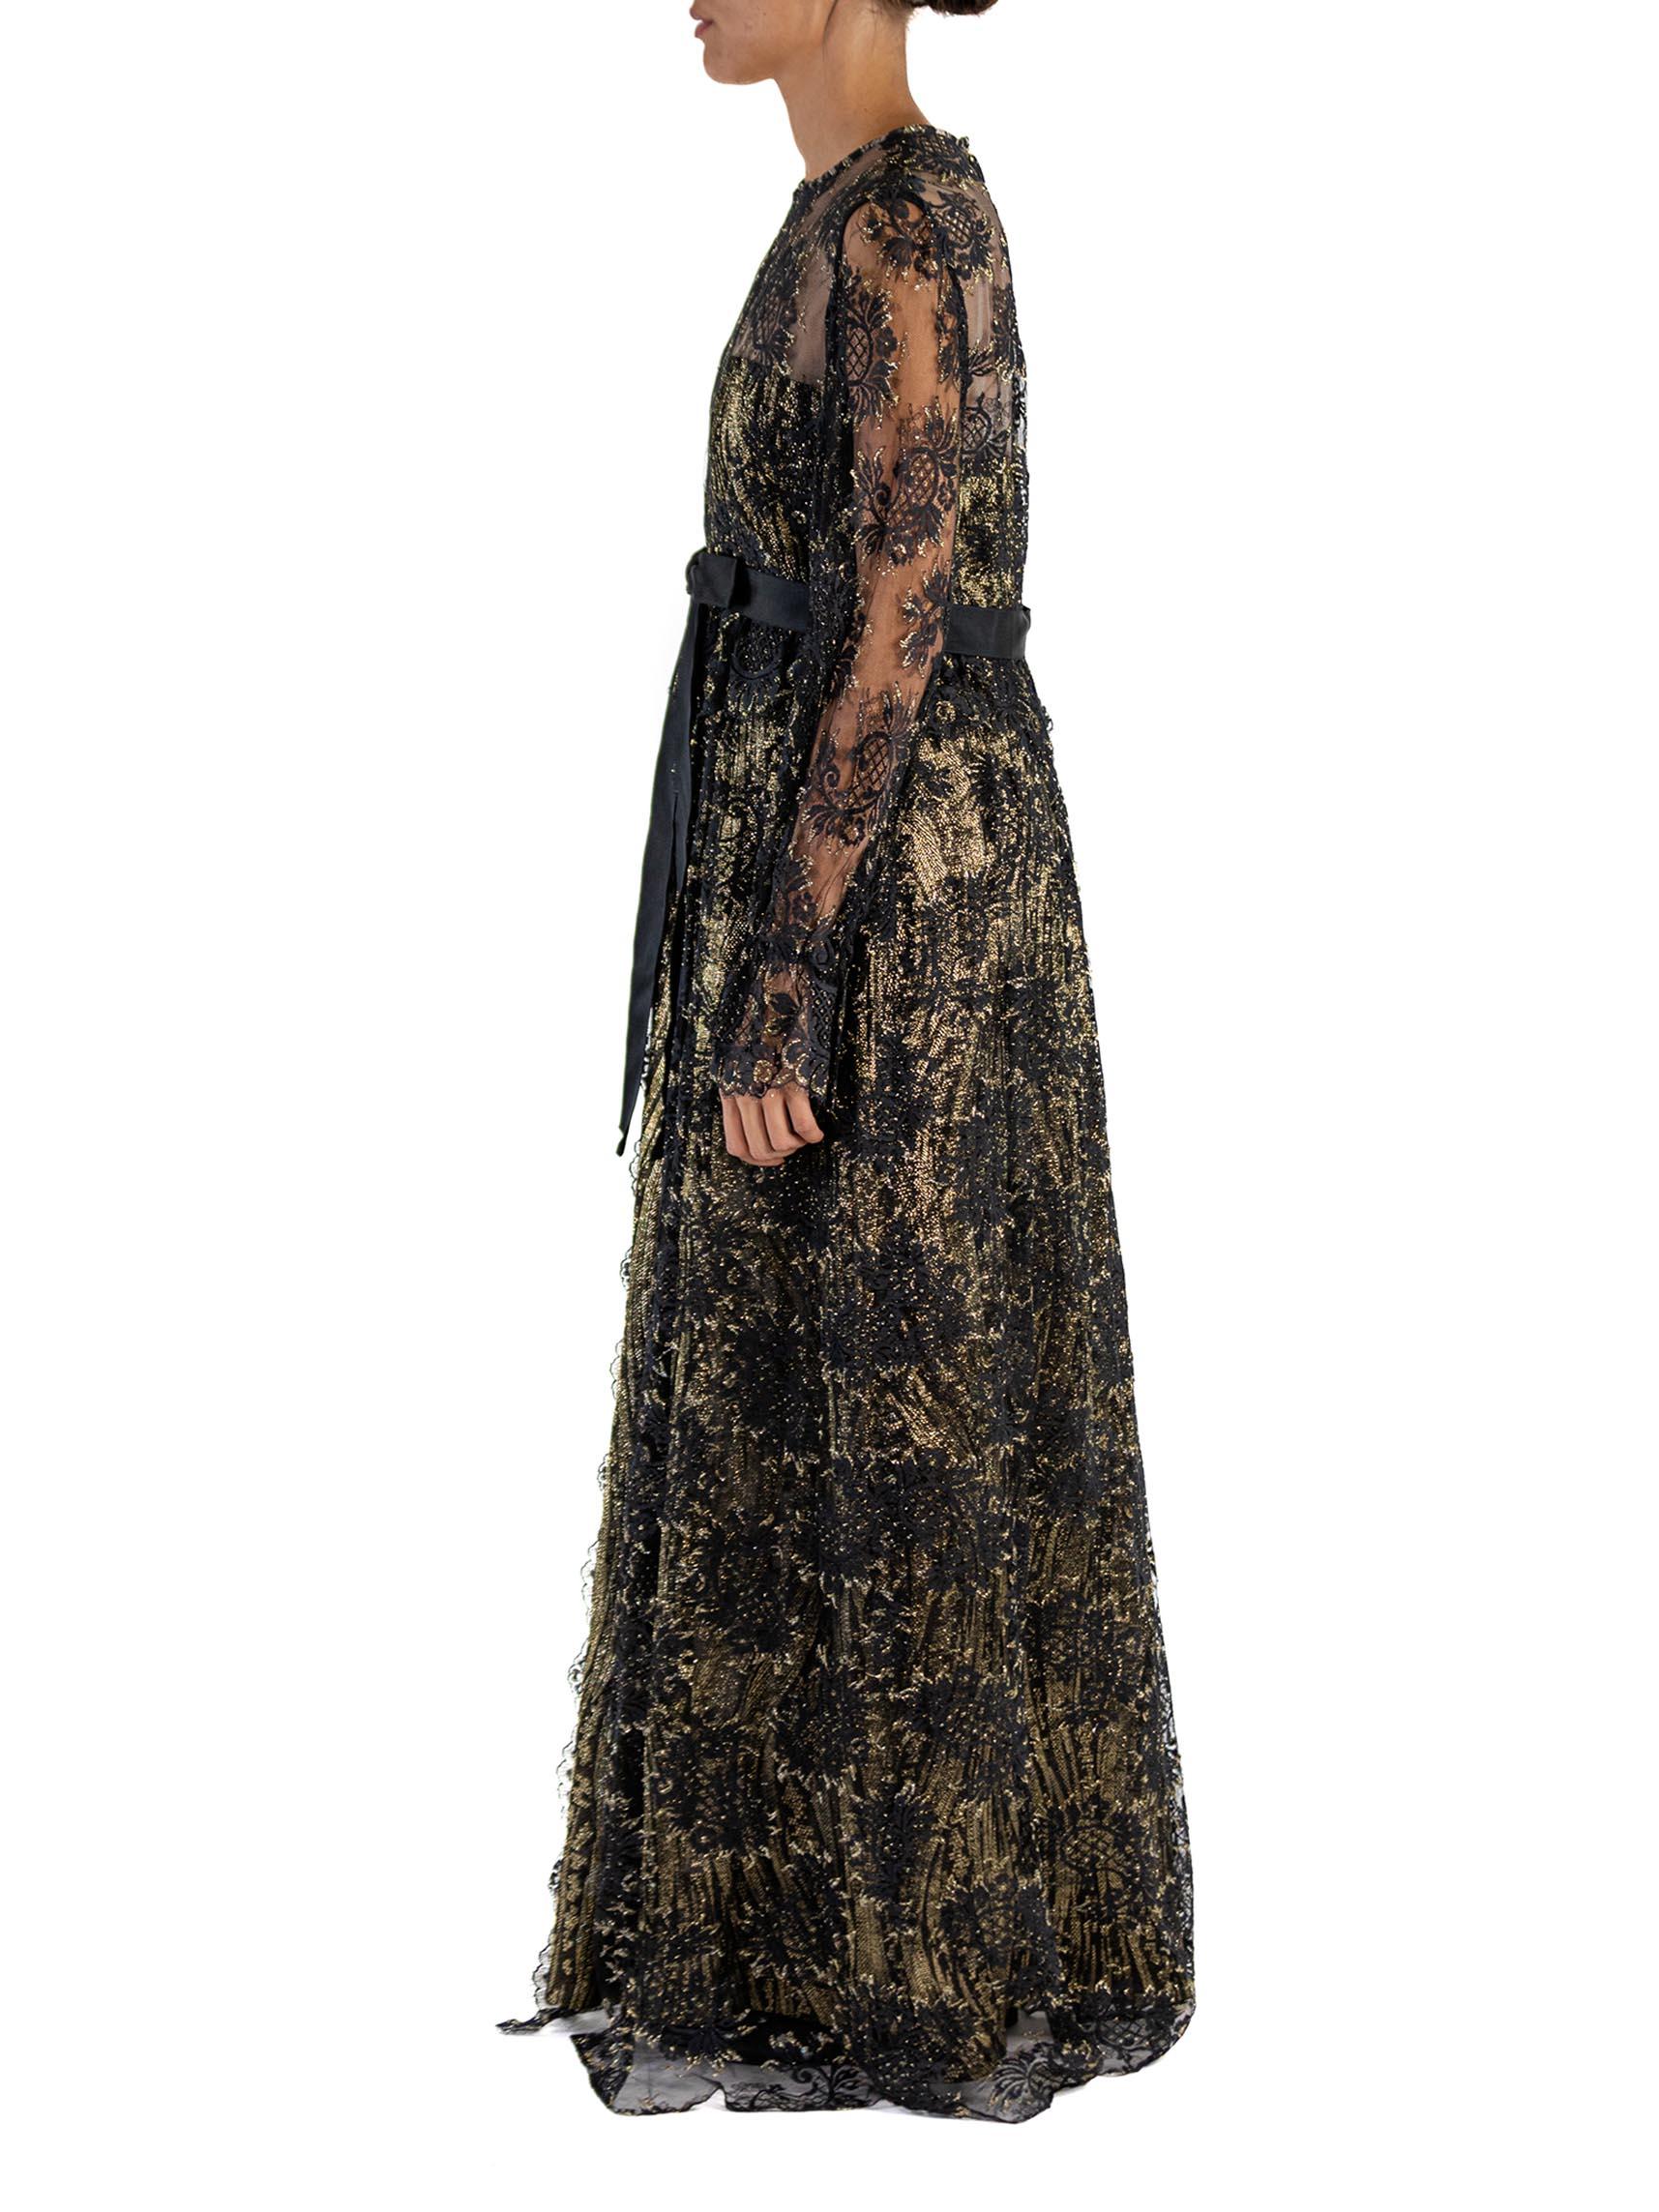 1970S Black & Gold Silk Lurex Jacquard Empire Waist Lace Overlay Gown With Sleeves